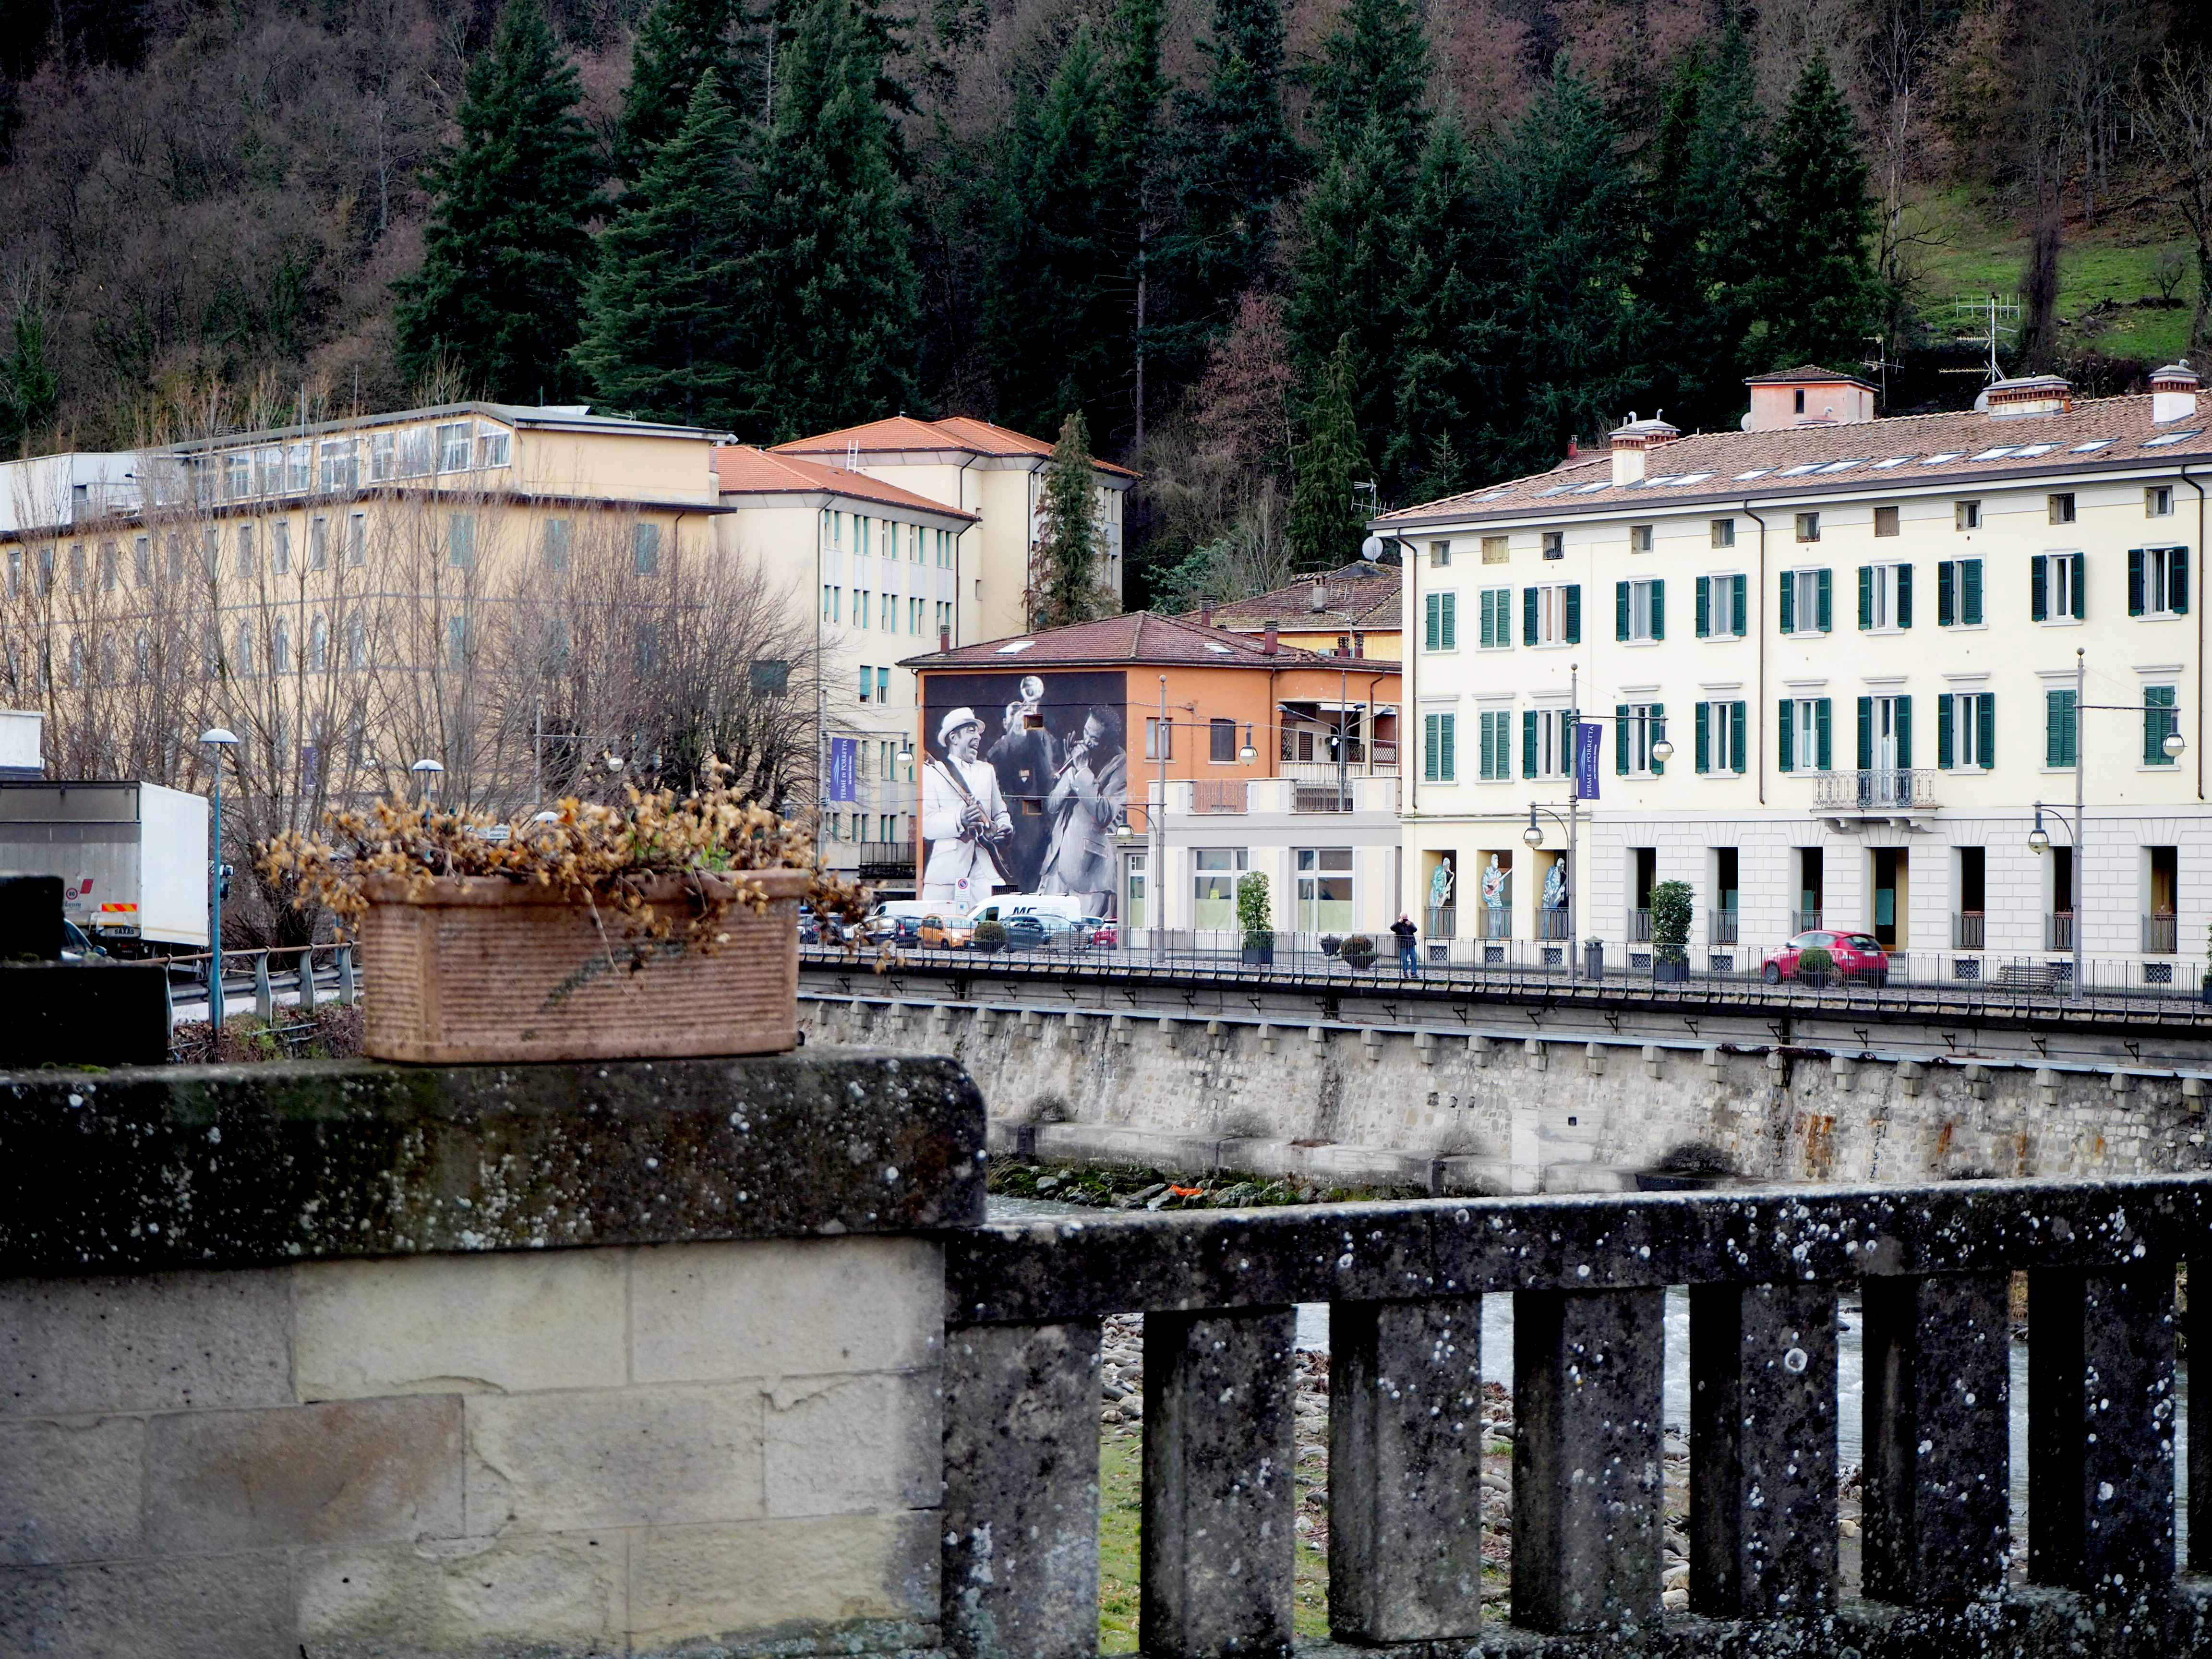 Porretta Terme: A Soul Music Haven Surrounded by Natural Beauty